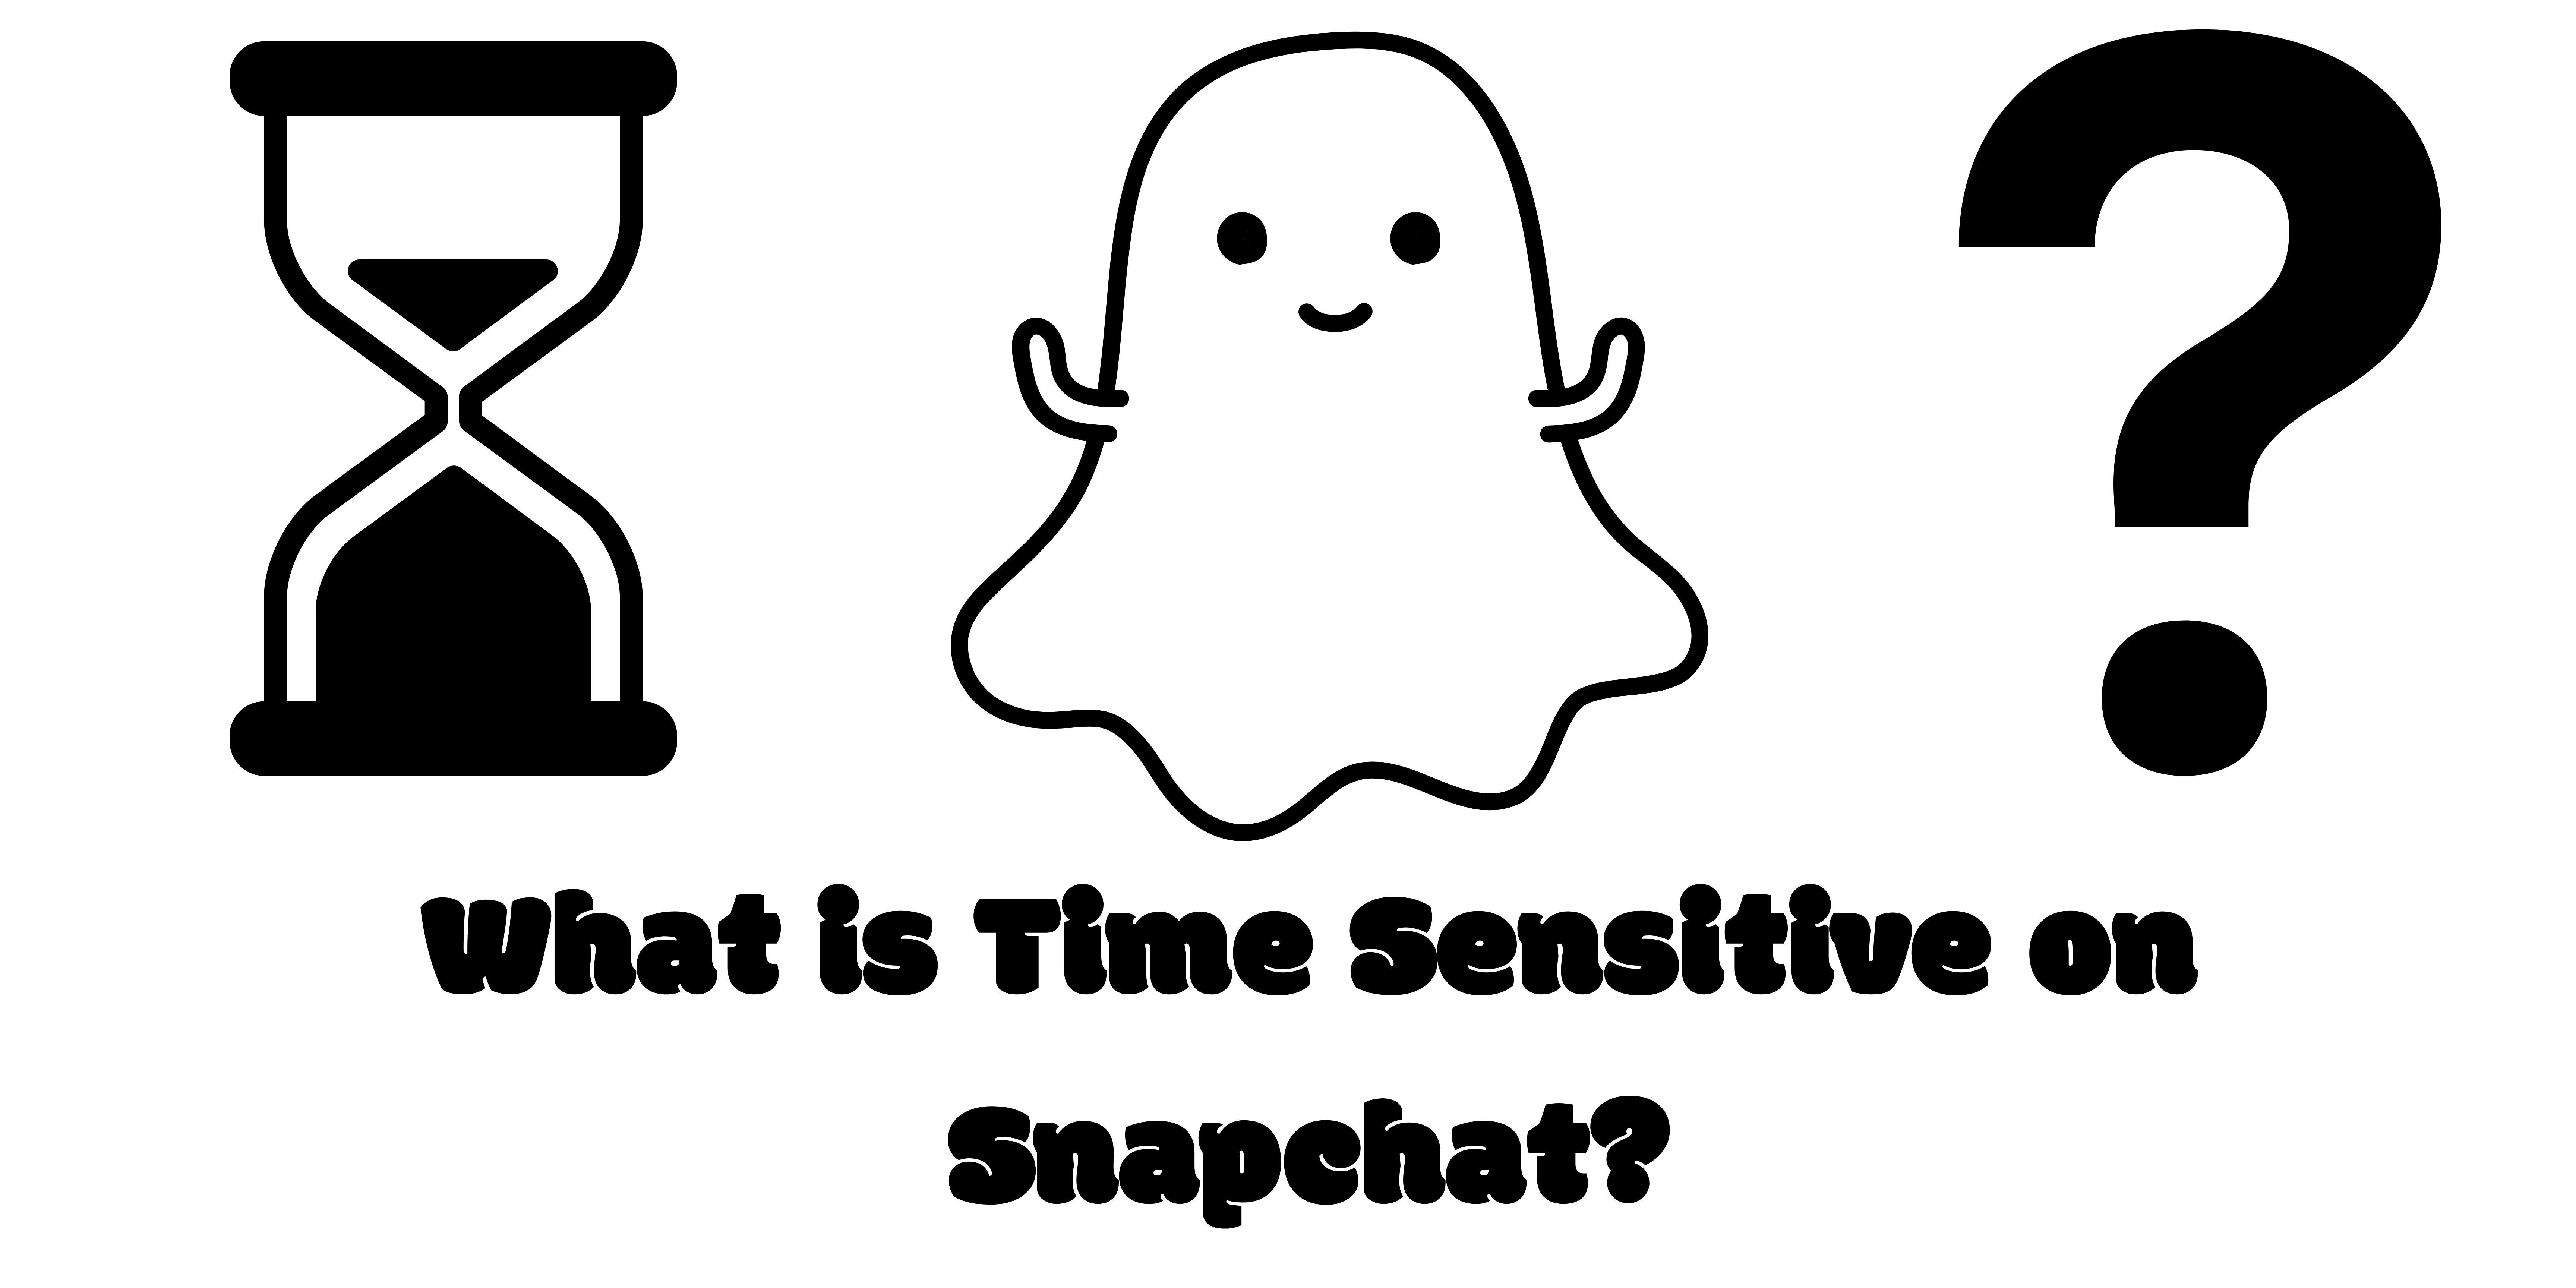 What does Time Sensitive mean on Snapchat